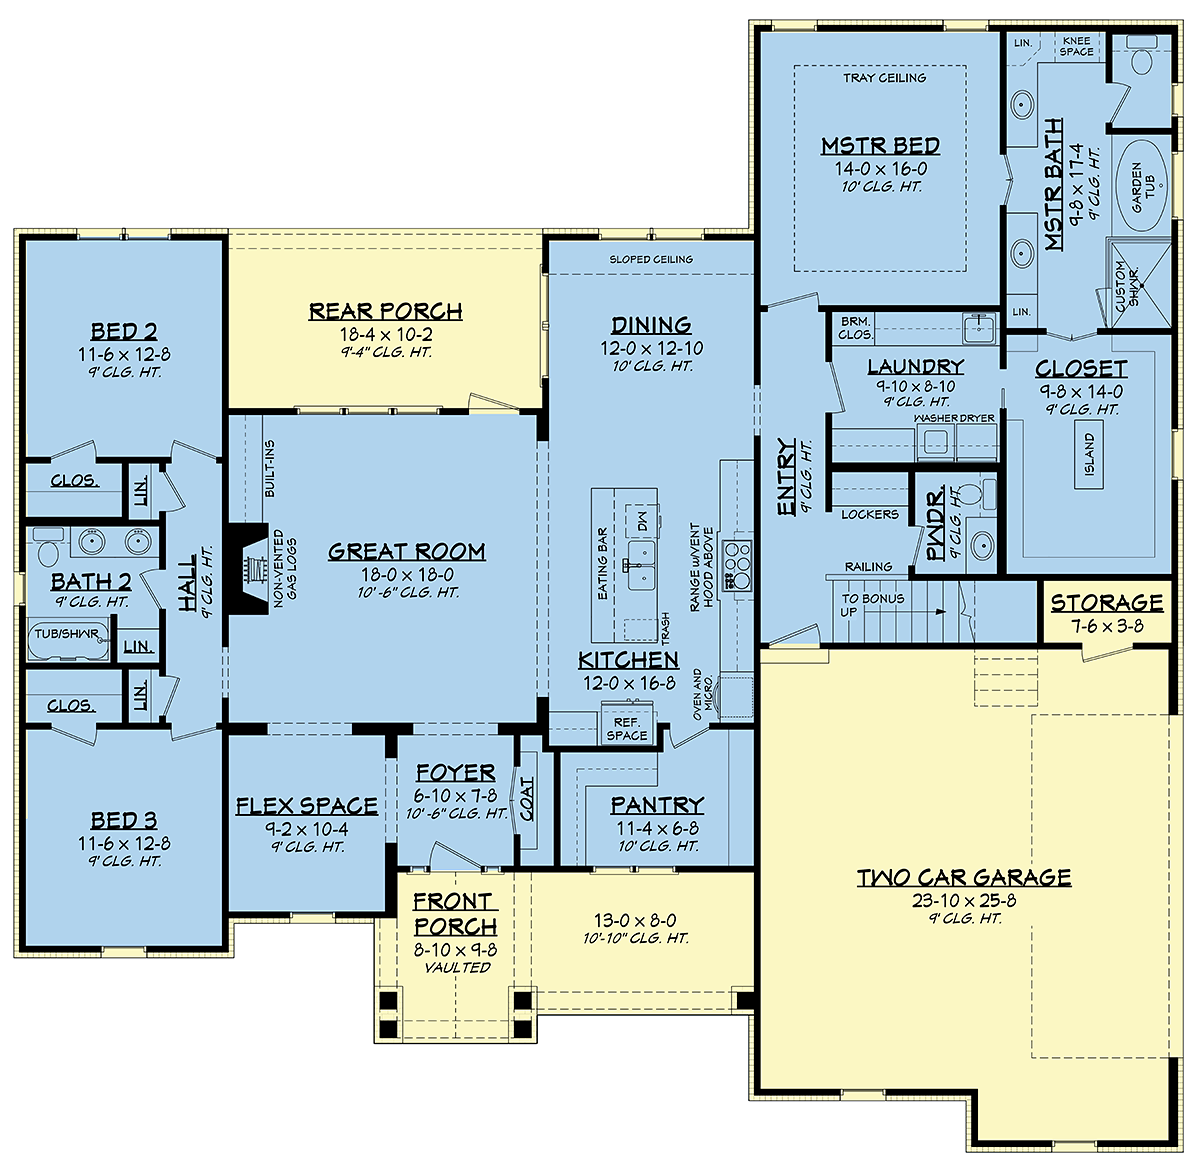 House Plans With Basement Find House Plans With Basement